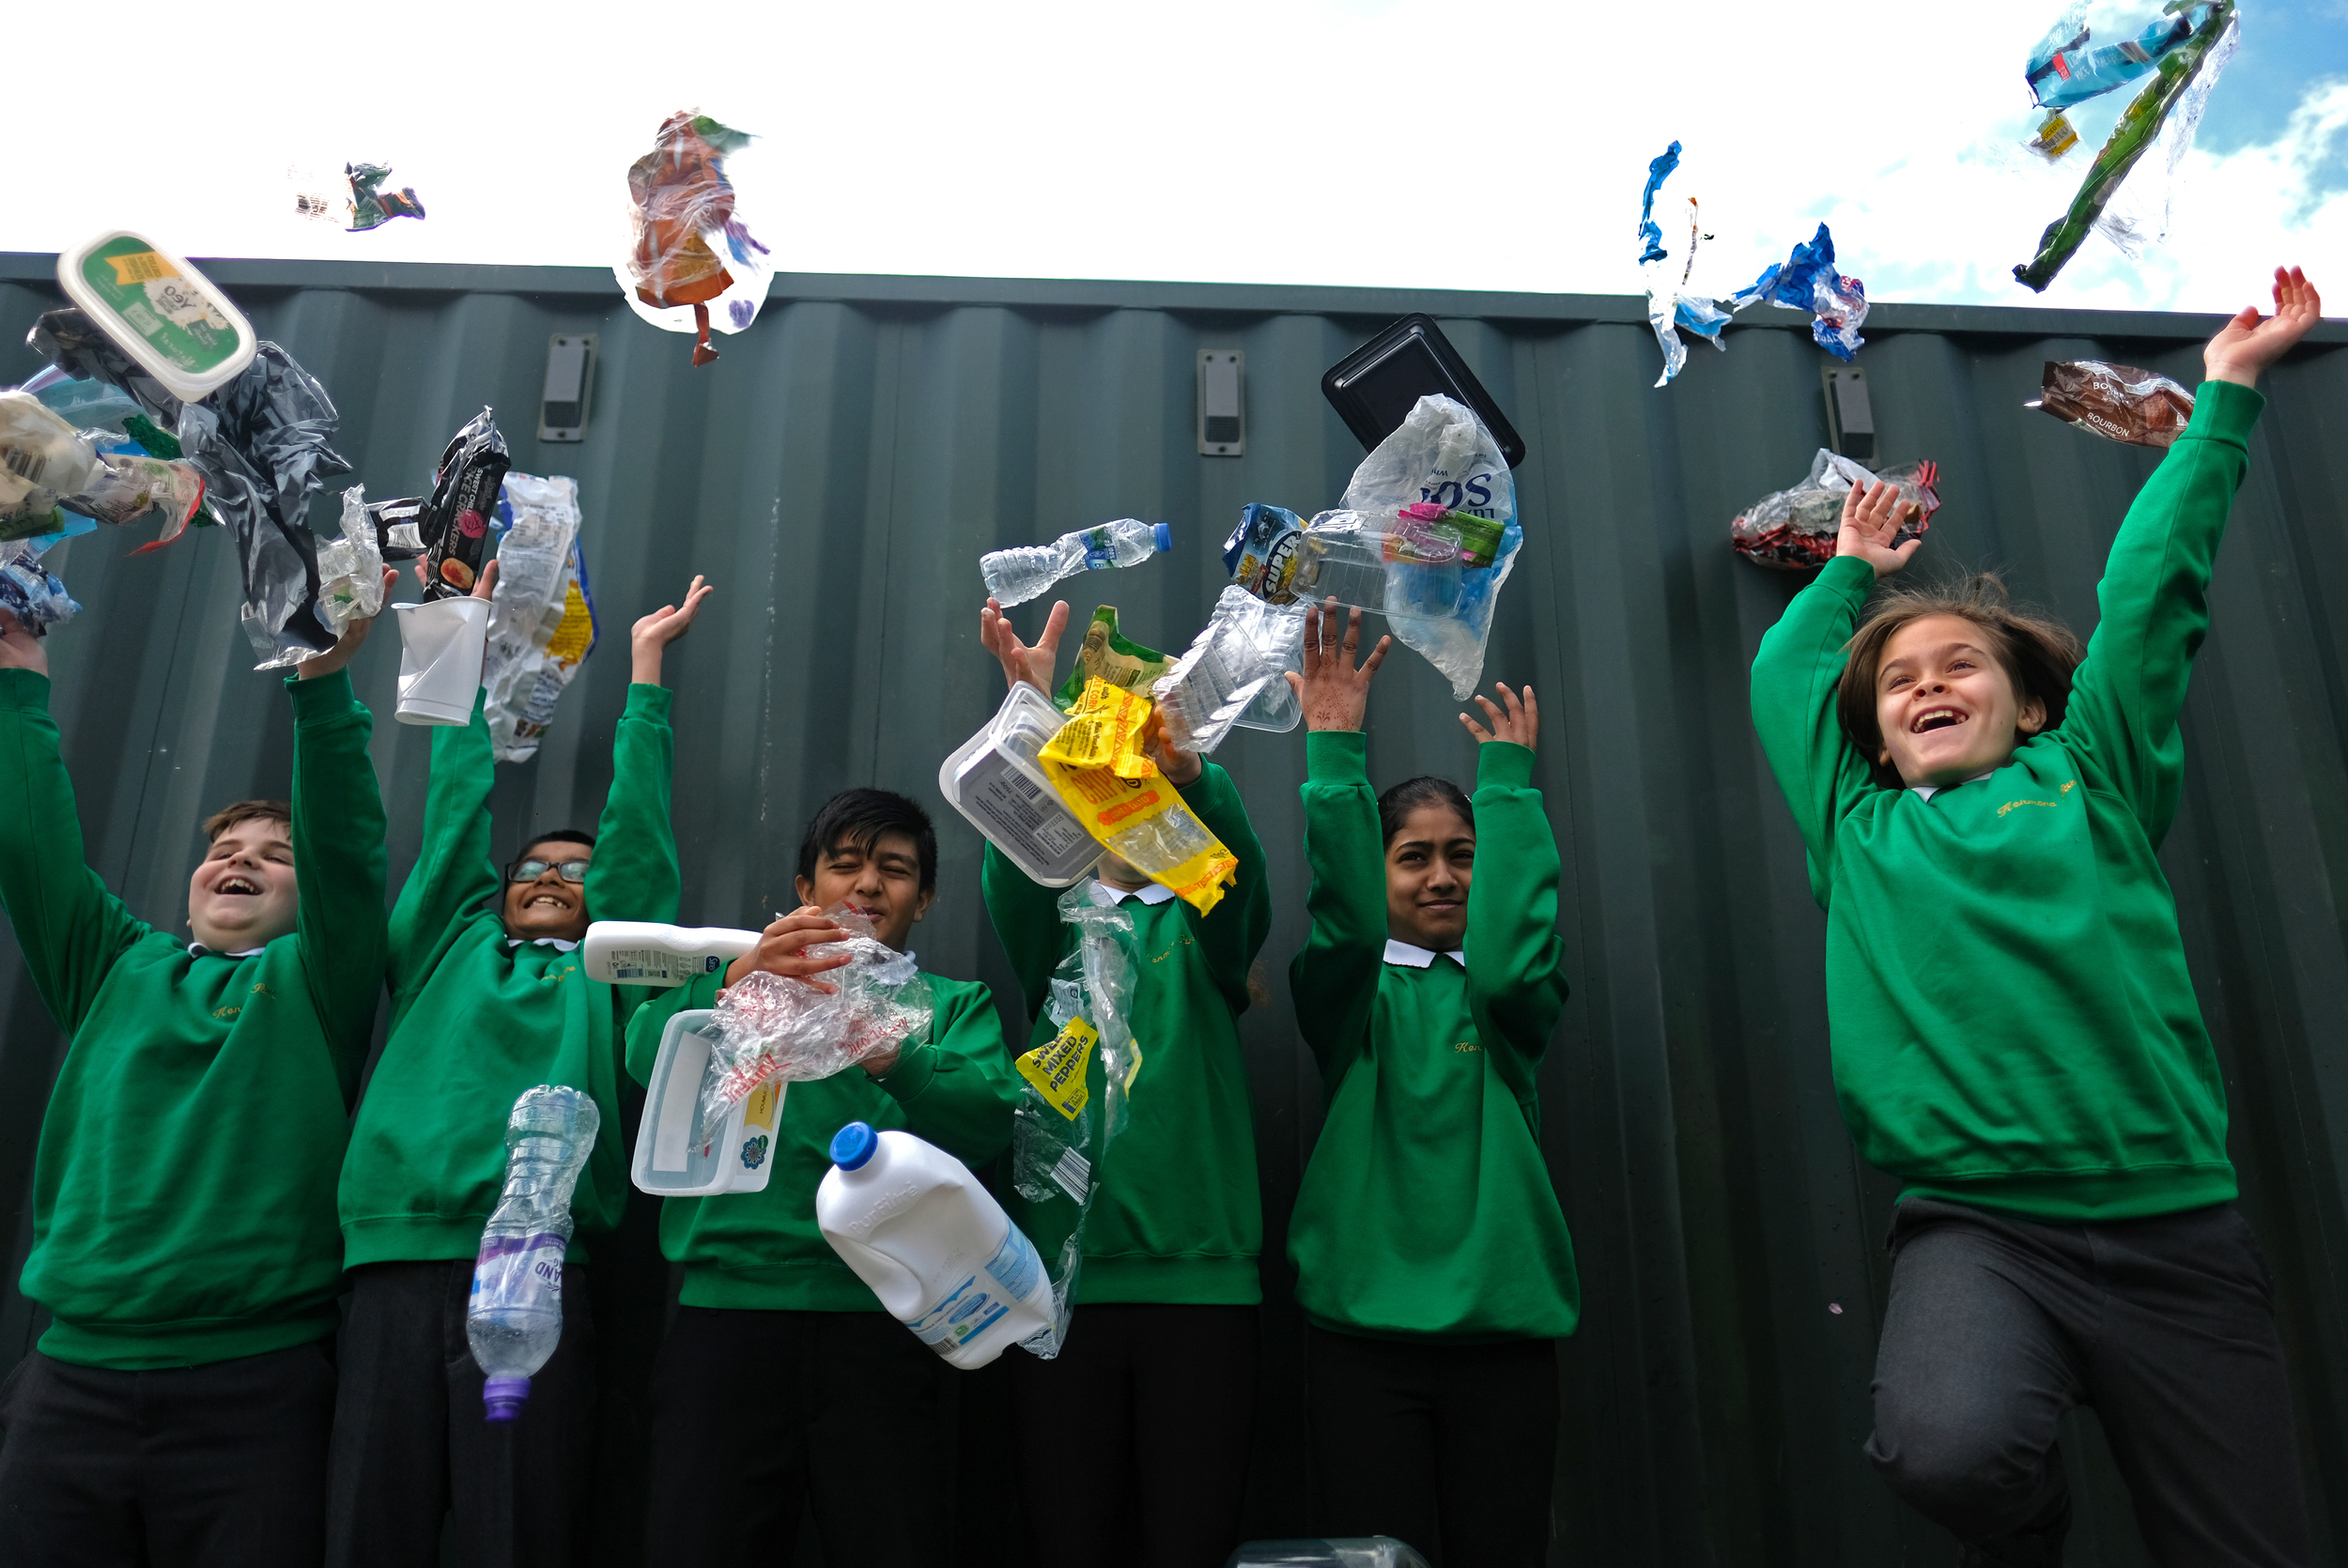 A line of children in green school jumpers throw plastic items into the air